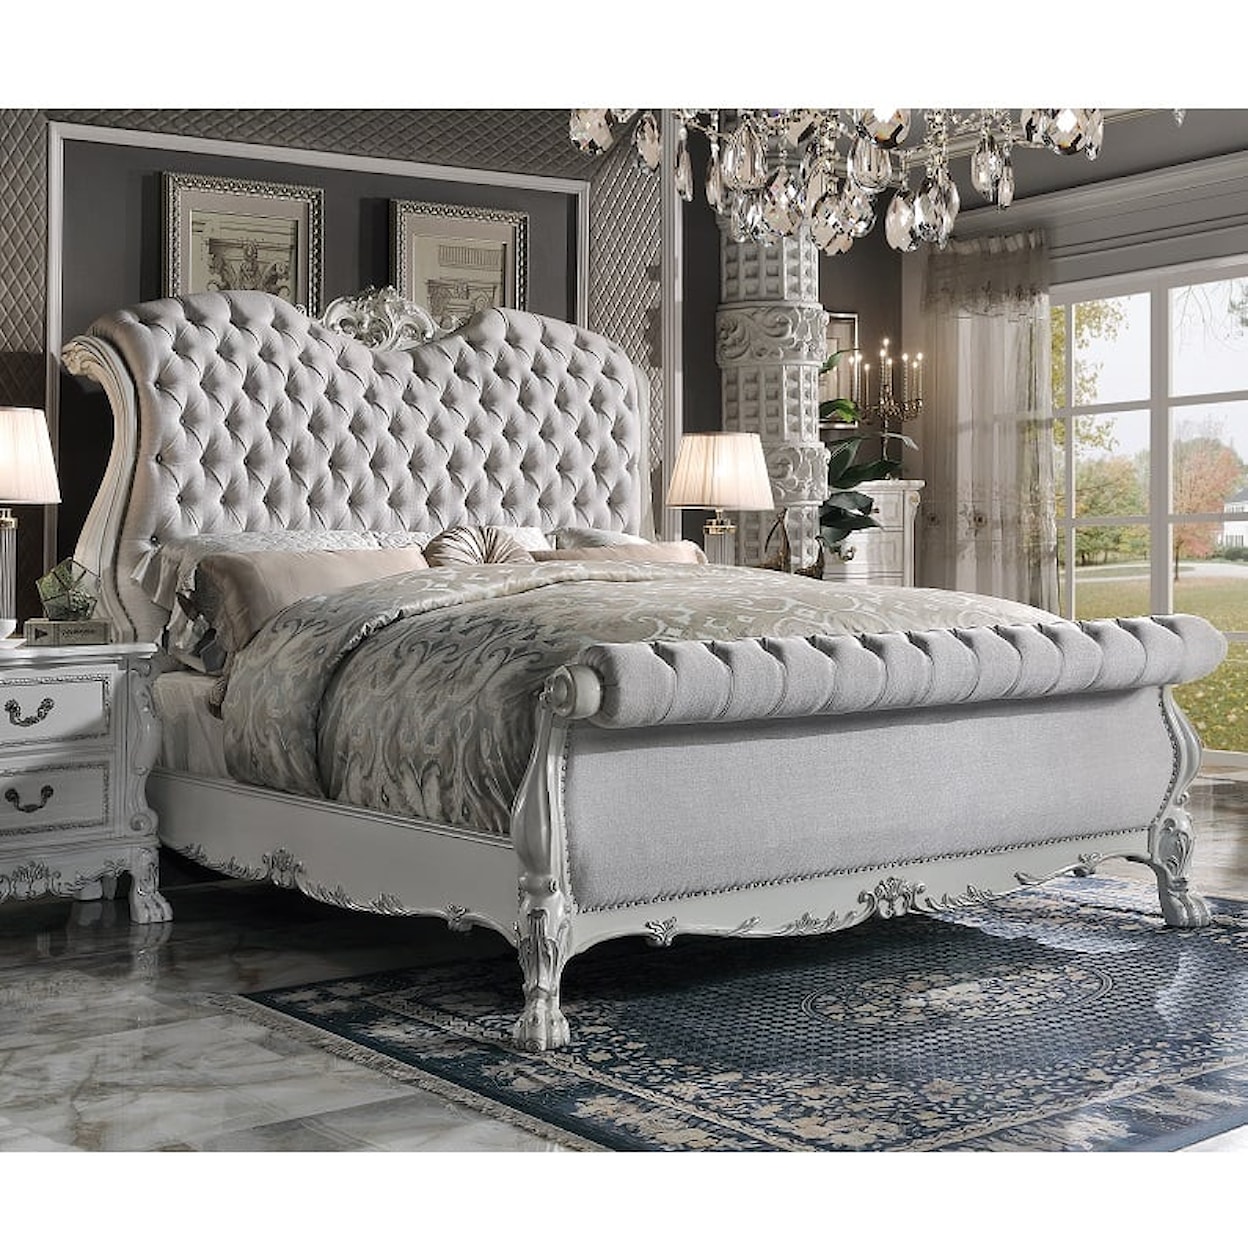 Acme Furniture Dresden King Sleigh Bed